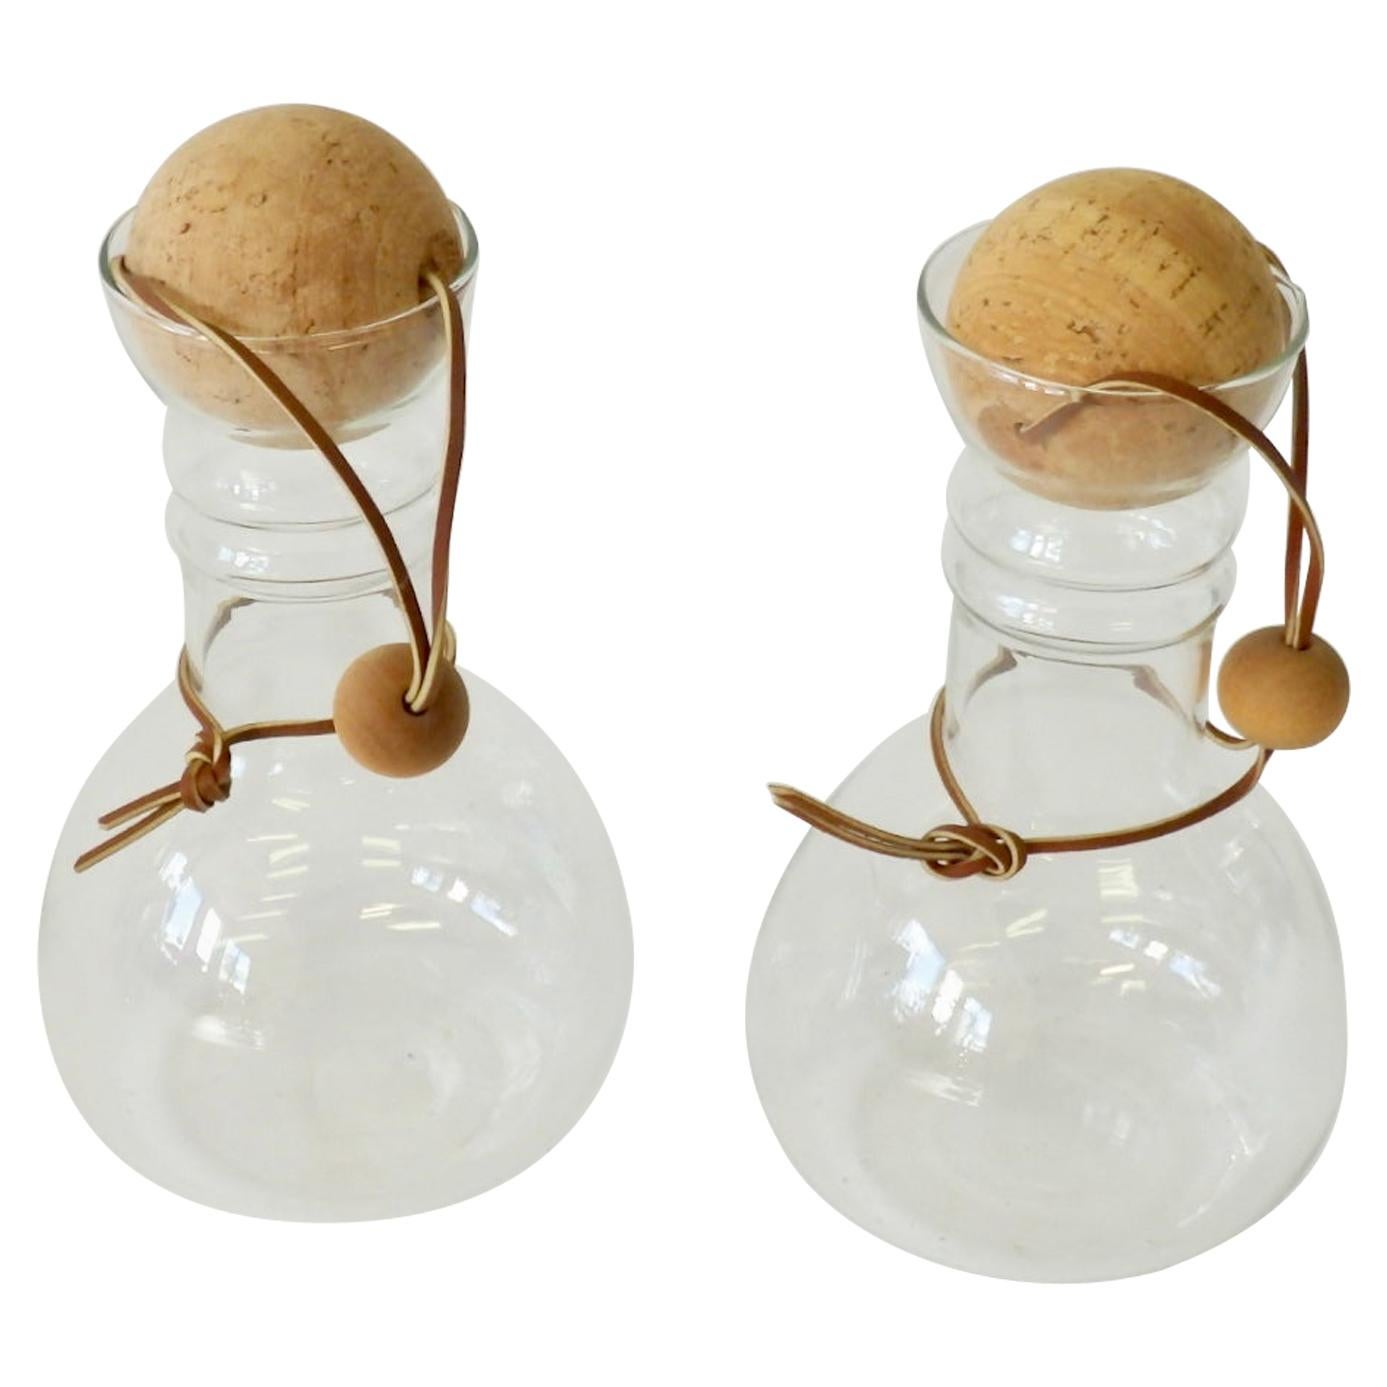 Pair of Modernist Pyrex Glass Decanters with Leather Bound Cork Ball Stoppers